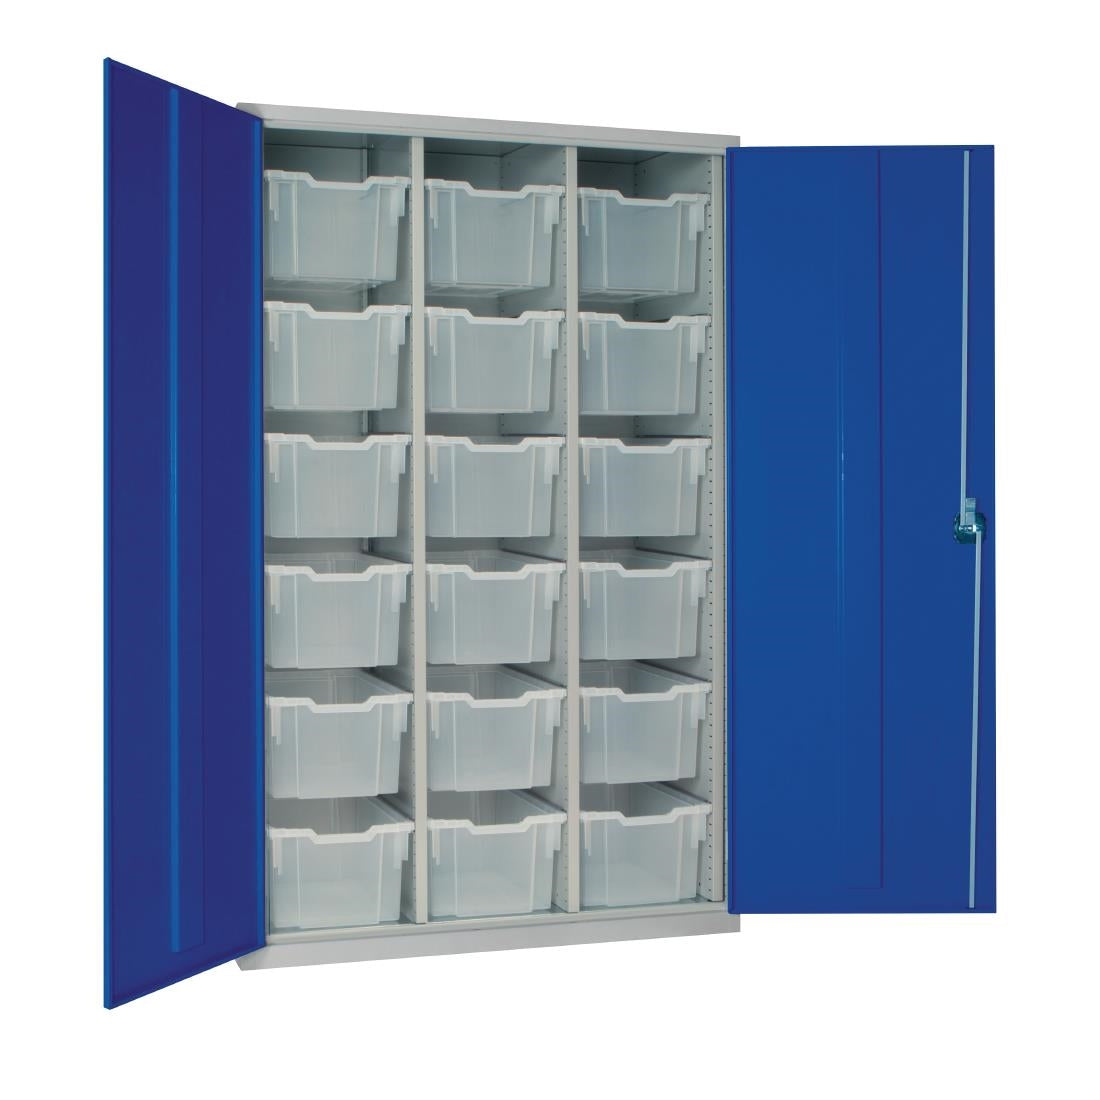 18 Tray High-Capacity Storage Cupboard - Blue with Transparent Trays